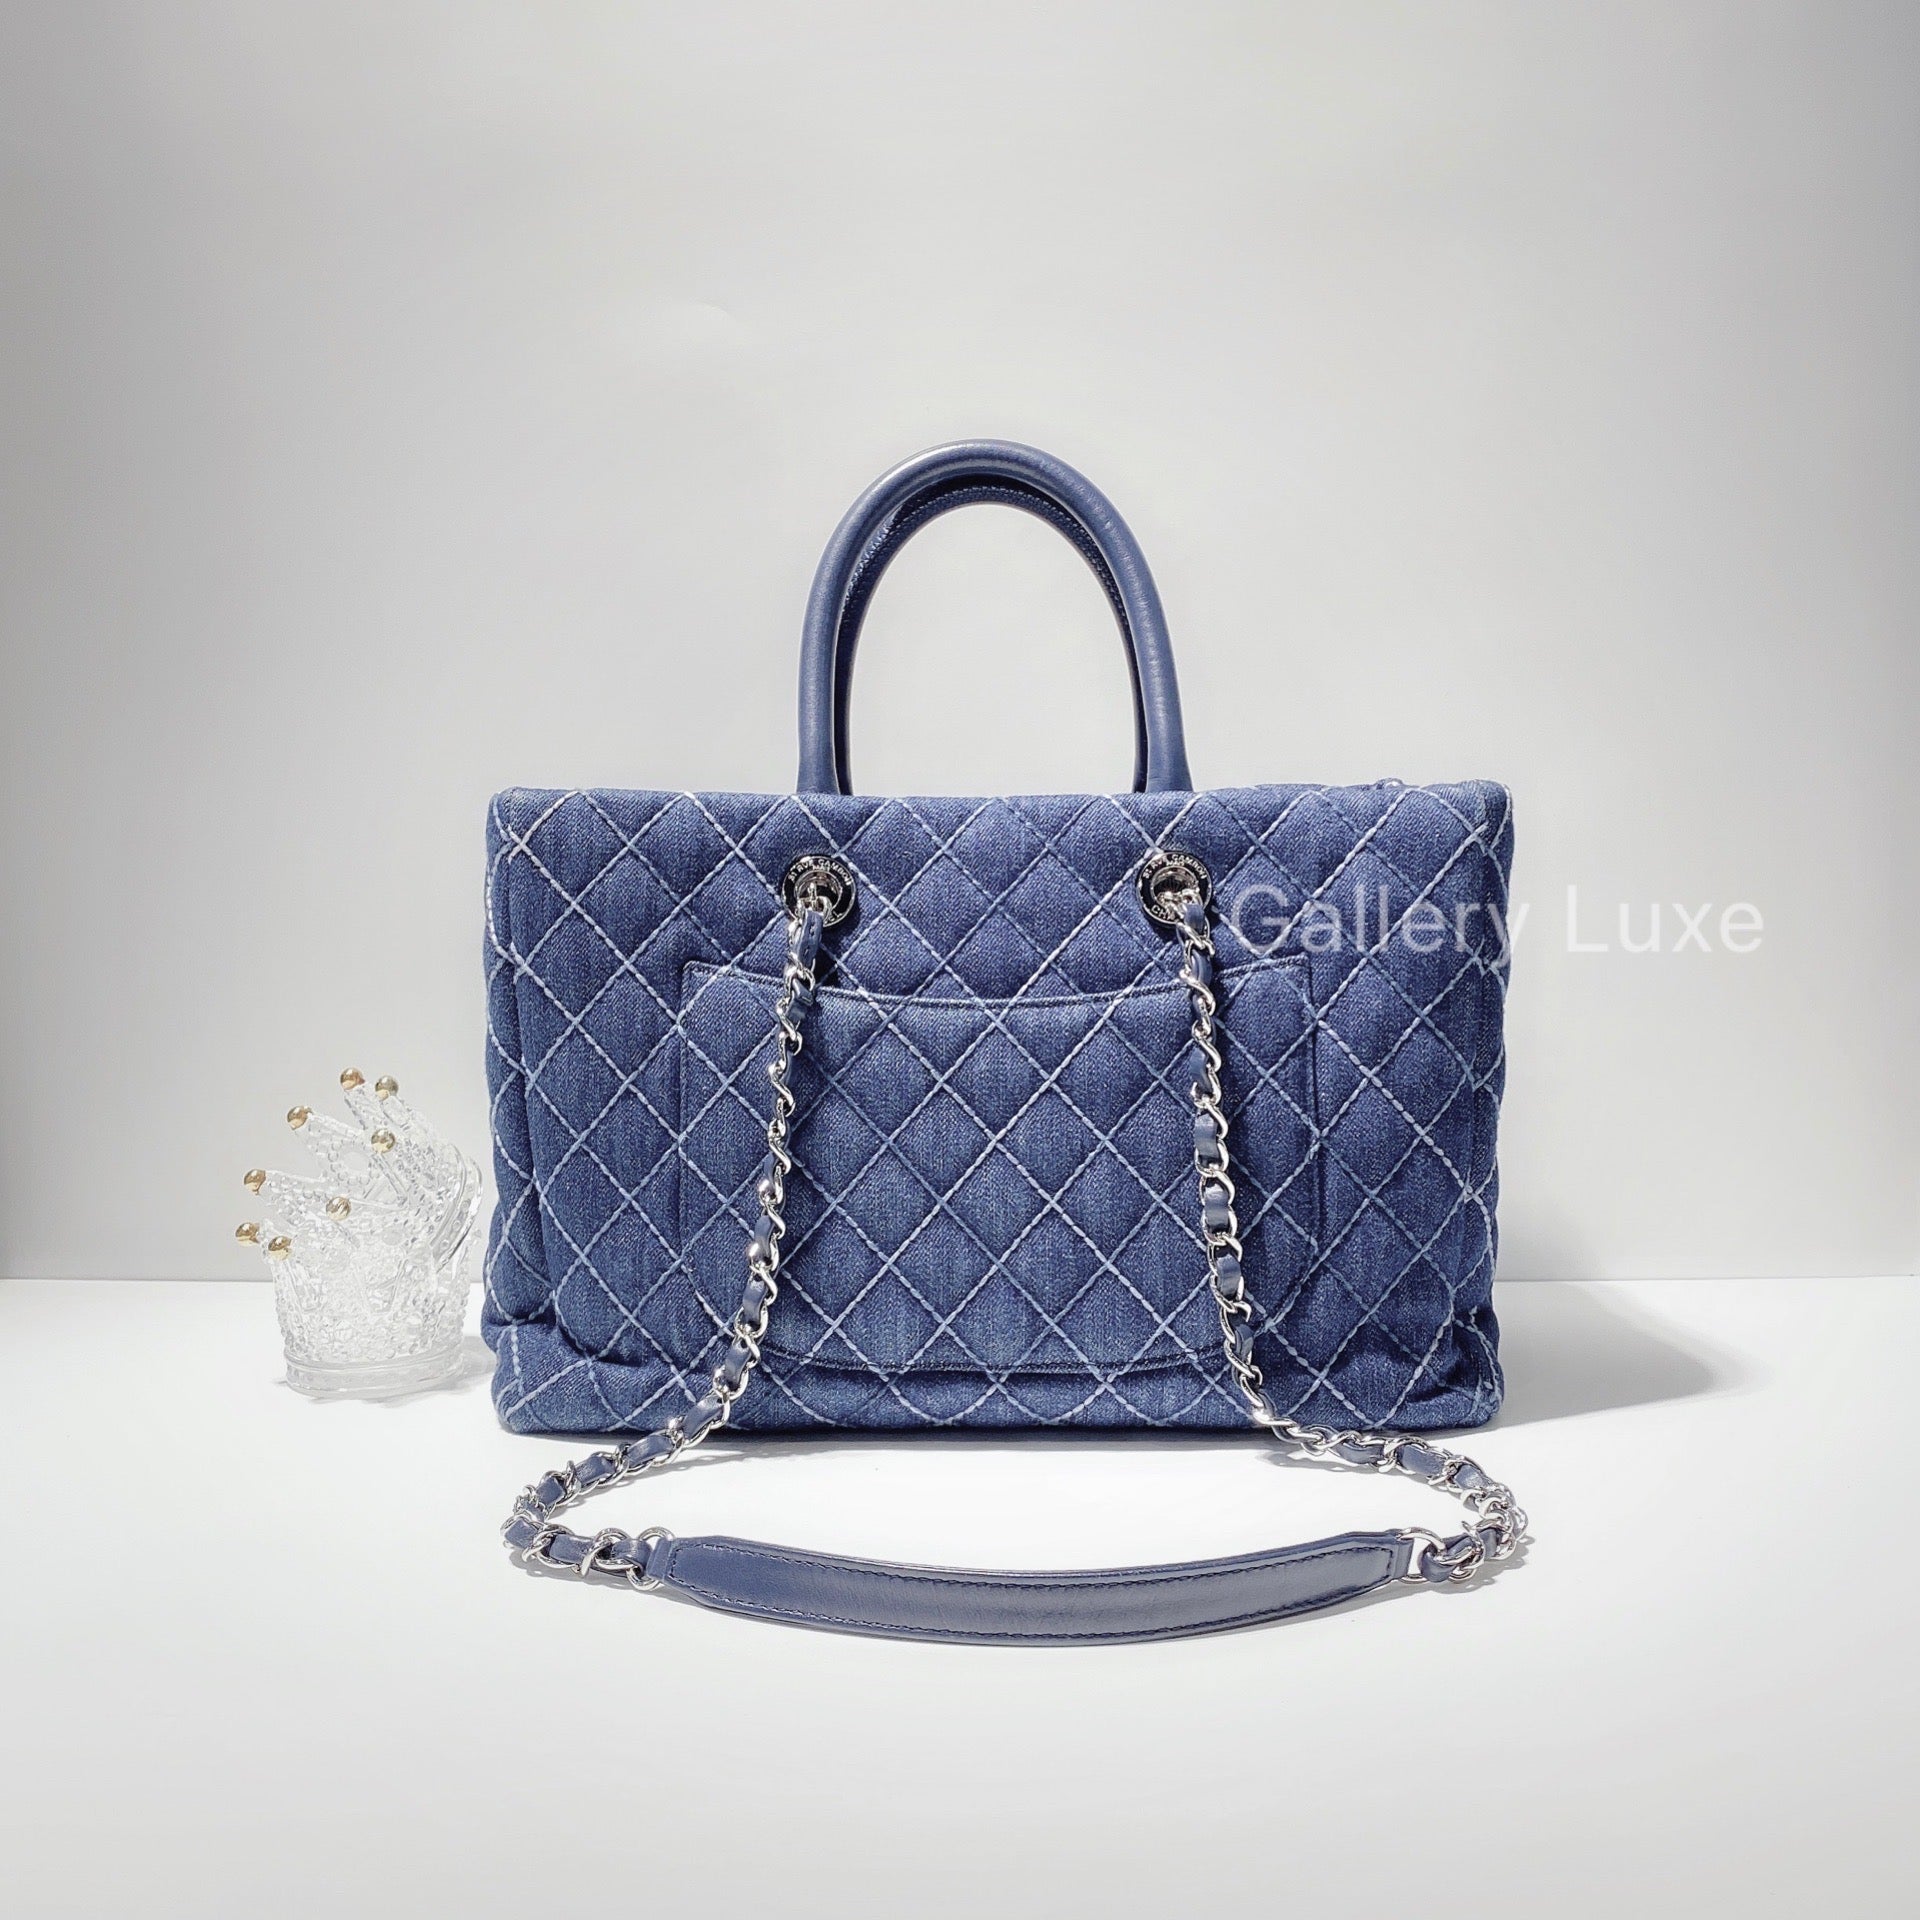 No.2508-Chanel Coco Allure Shopping Bag – Gallery Luxe